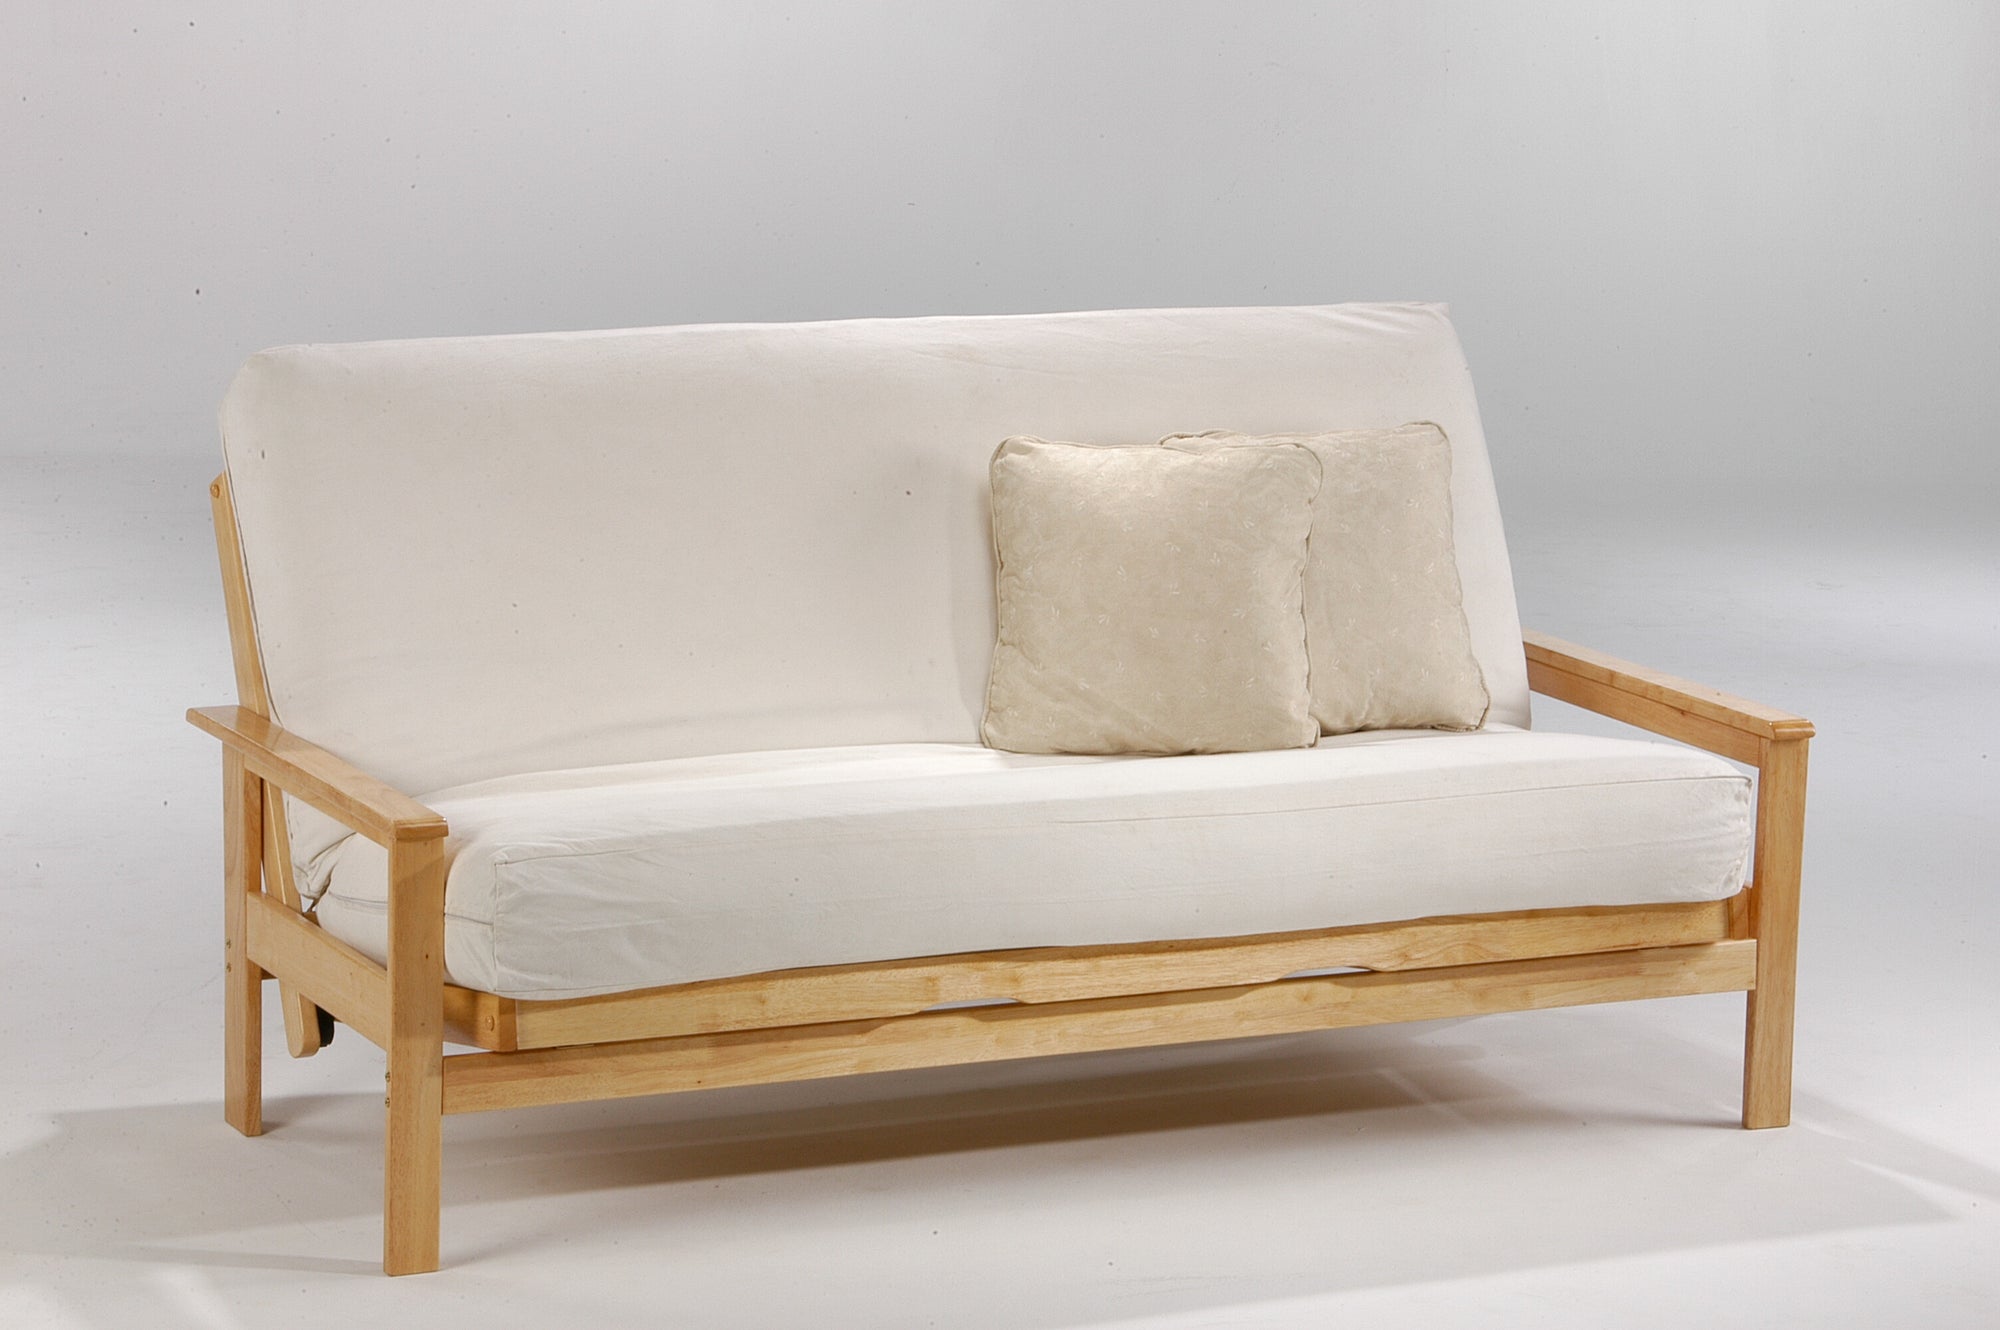 Albany futon frame - natural wood frame with futon mattress and cream coloured fabric